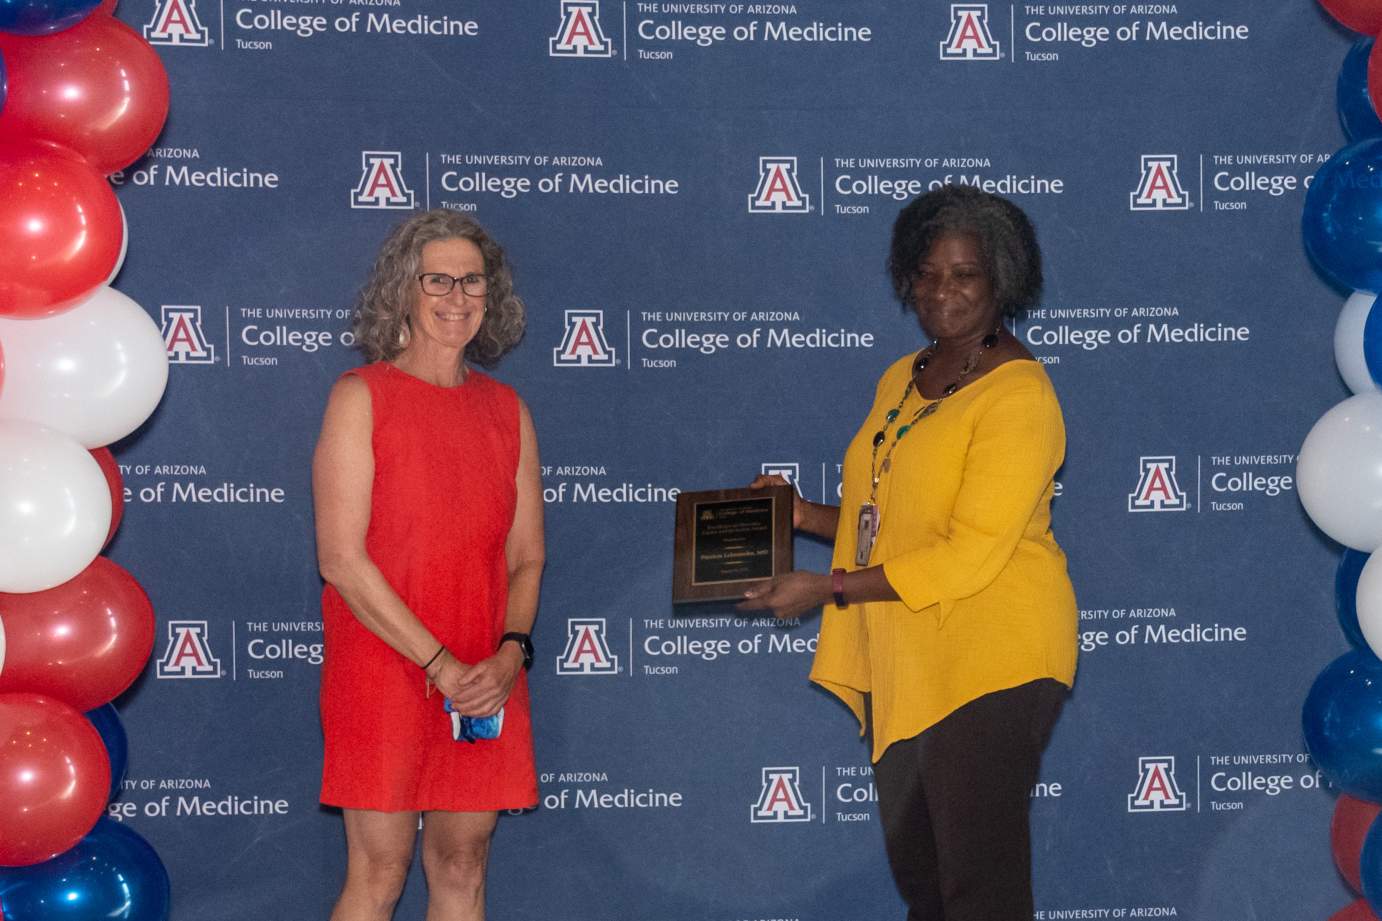 [Dr. Patricia Lebensohn is presented with the Awards for Excellence in Diversity, Equity, and Inclusion by Dr. Victoria Murrain.]